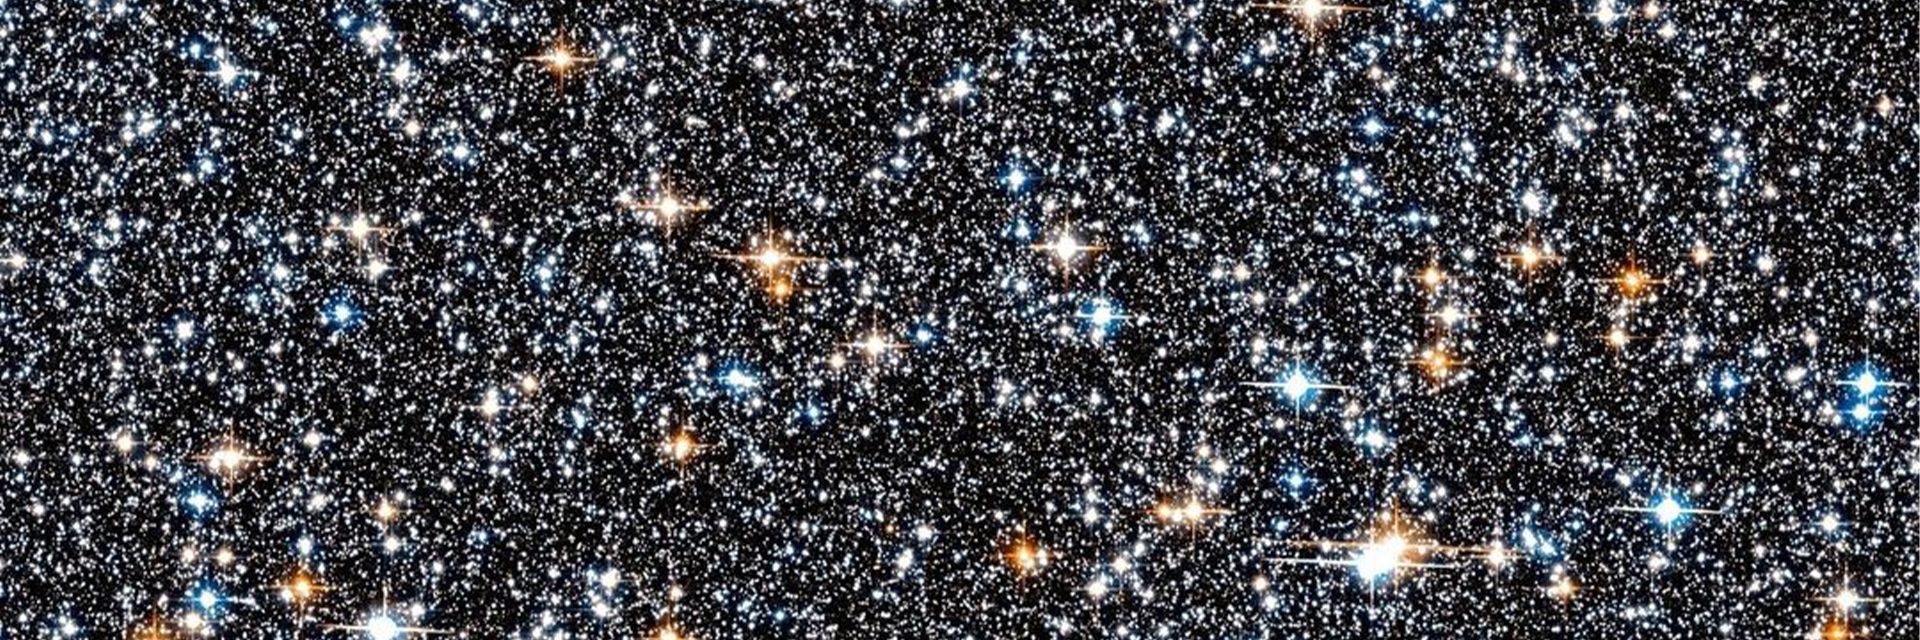 The official handle of Nasa shared the picture of a collection of these galactic monuments 26,000 light-years from Earth, captured by the Hubble Telescope.